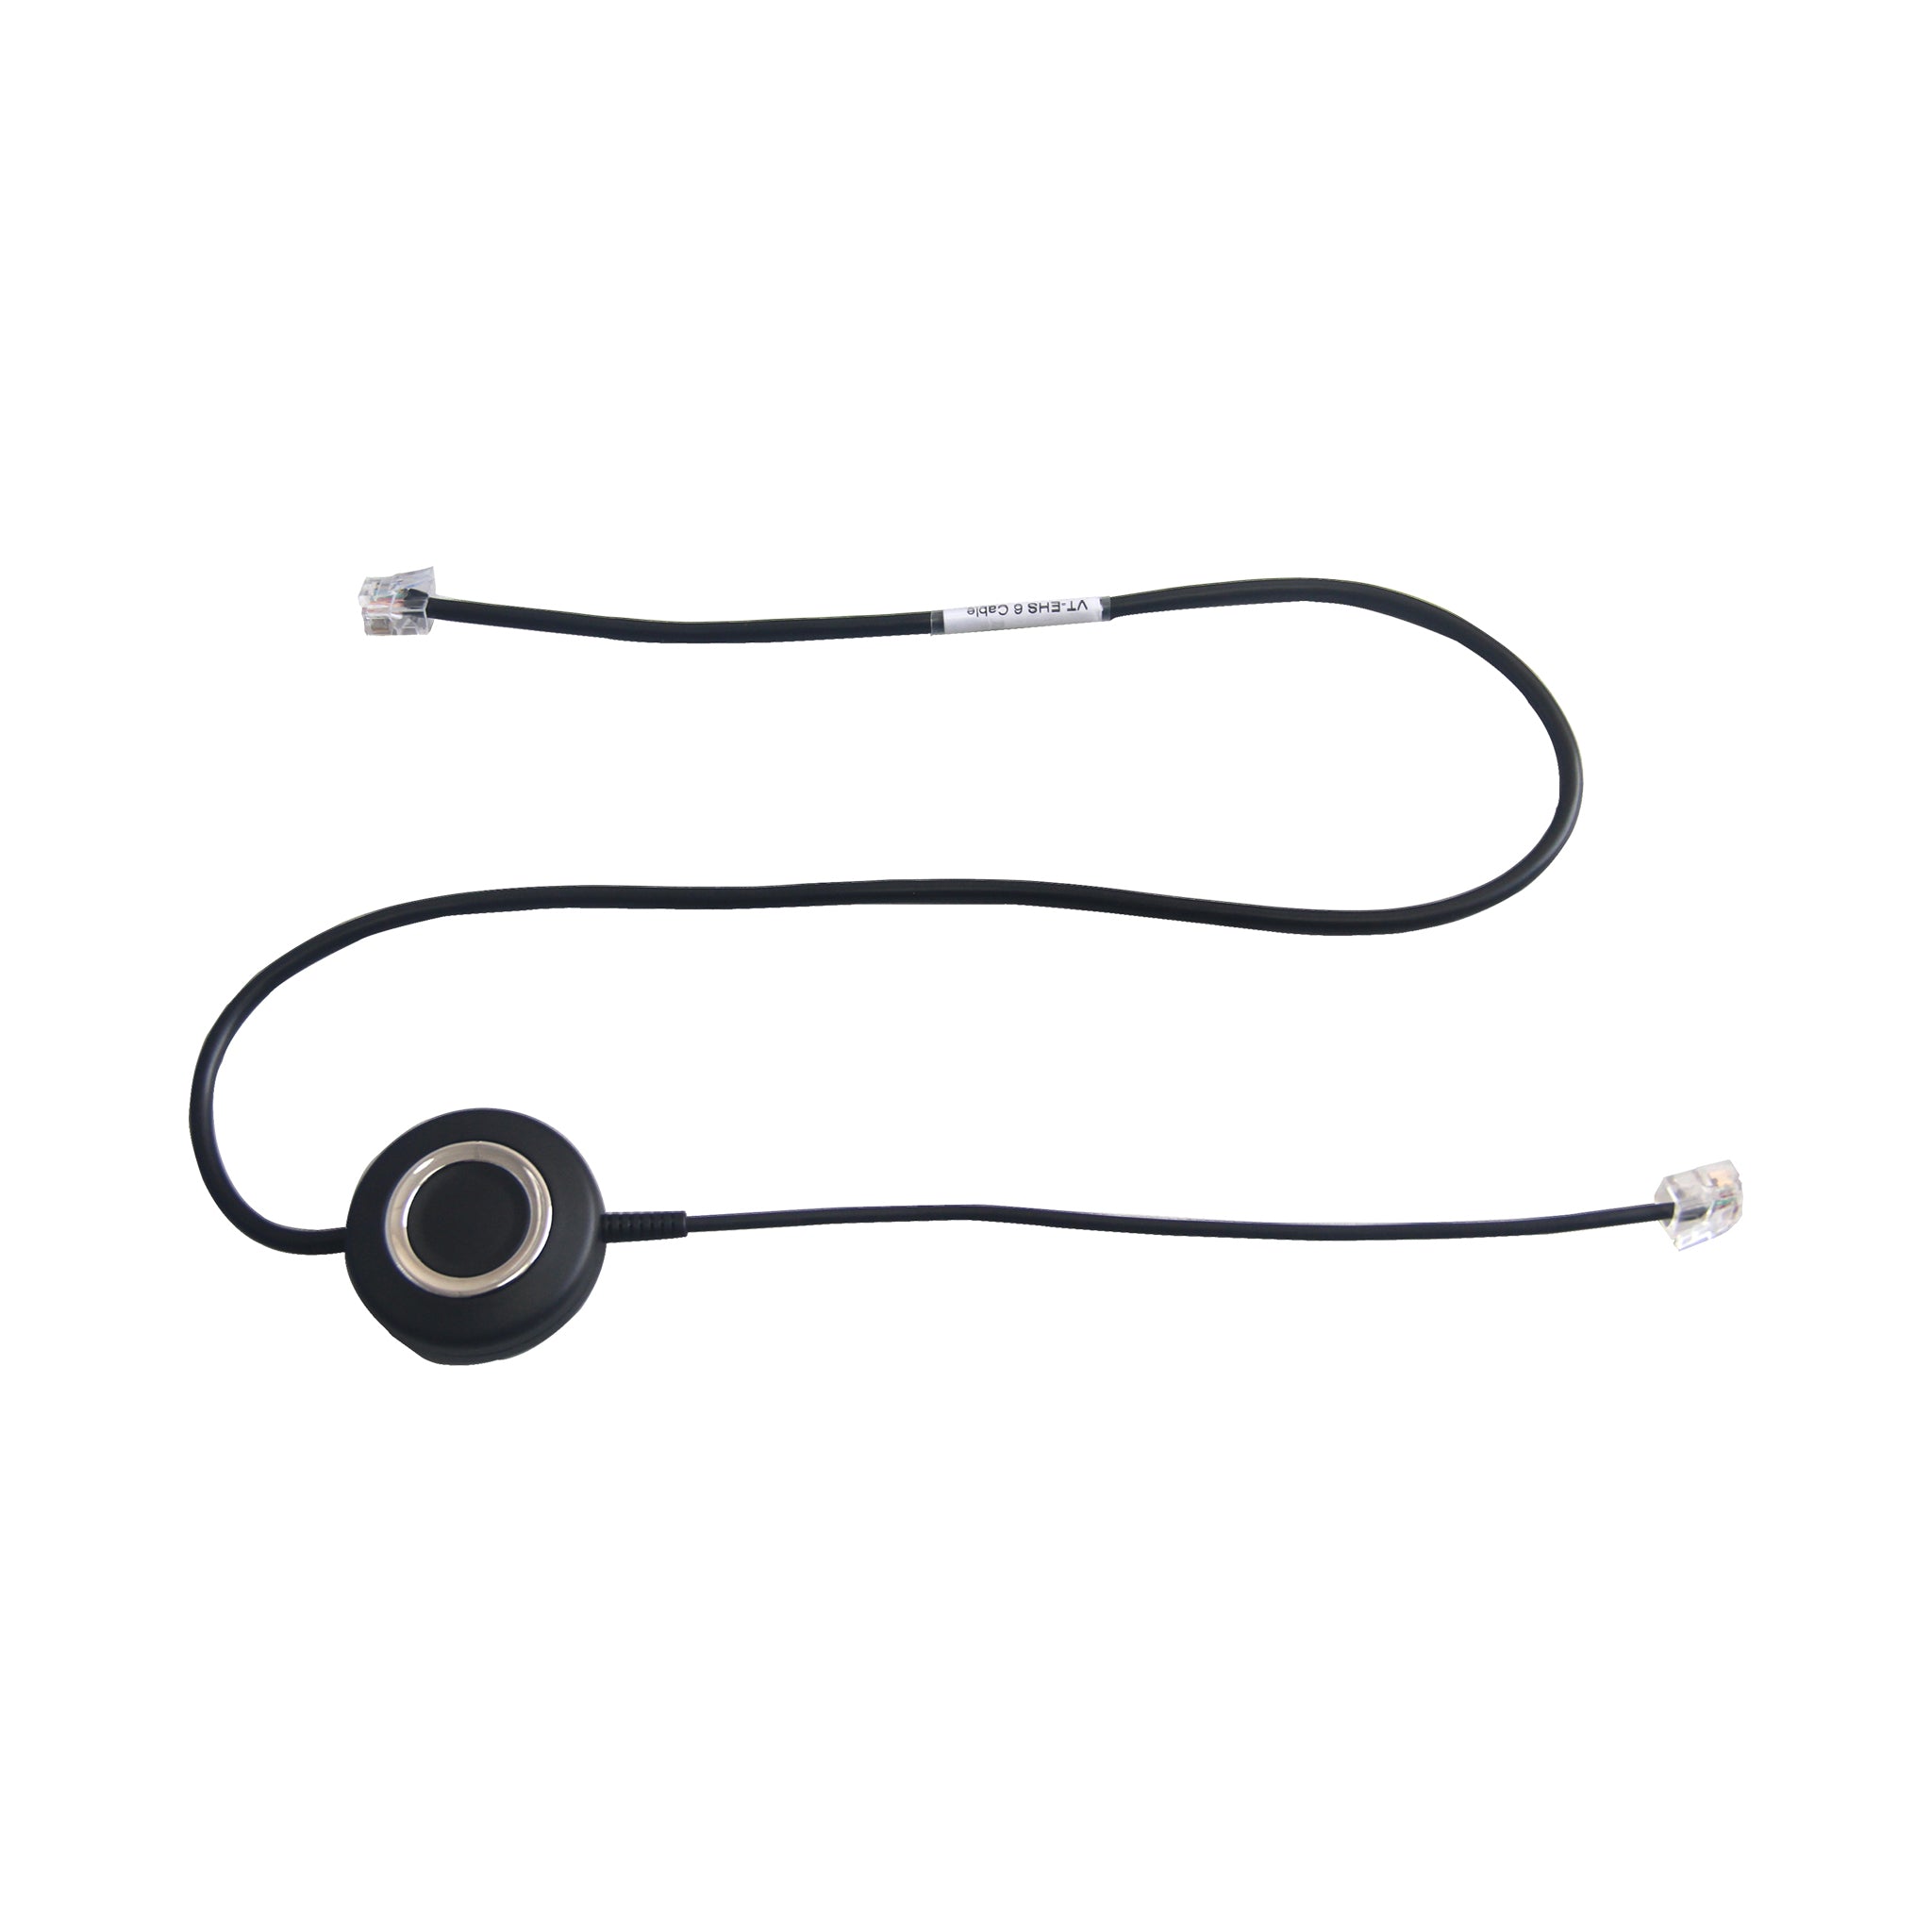 Vt Headset Cable Ehs6 * Ehs6 - Headsets Accessories